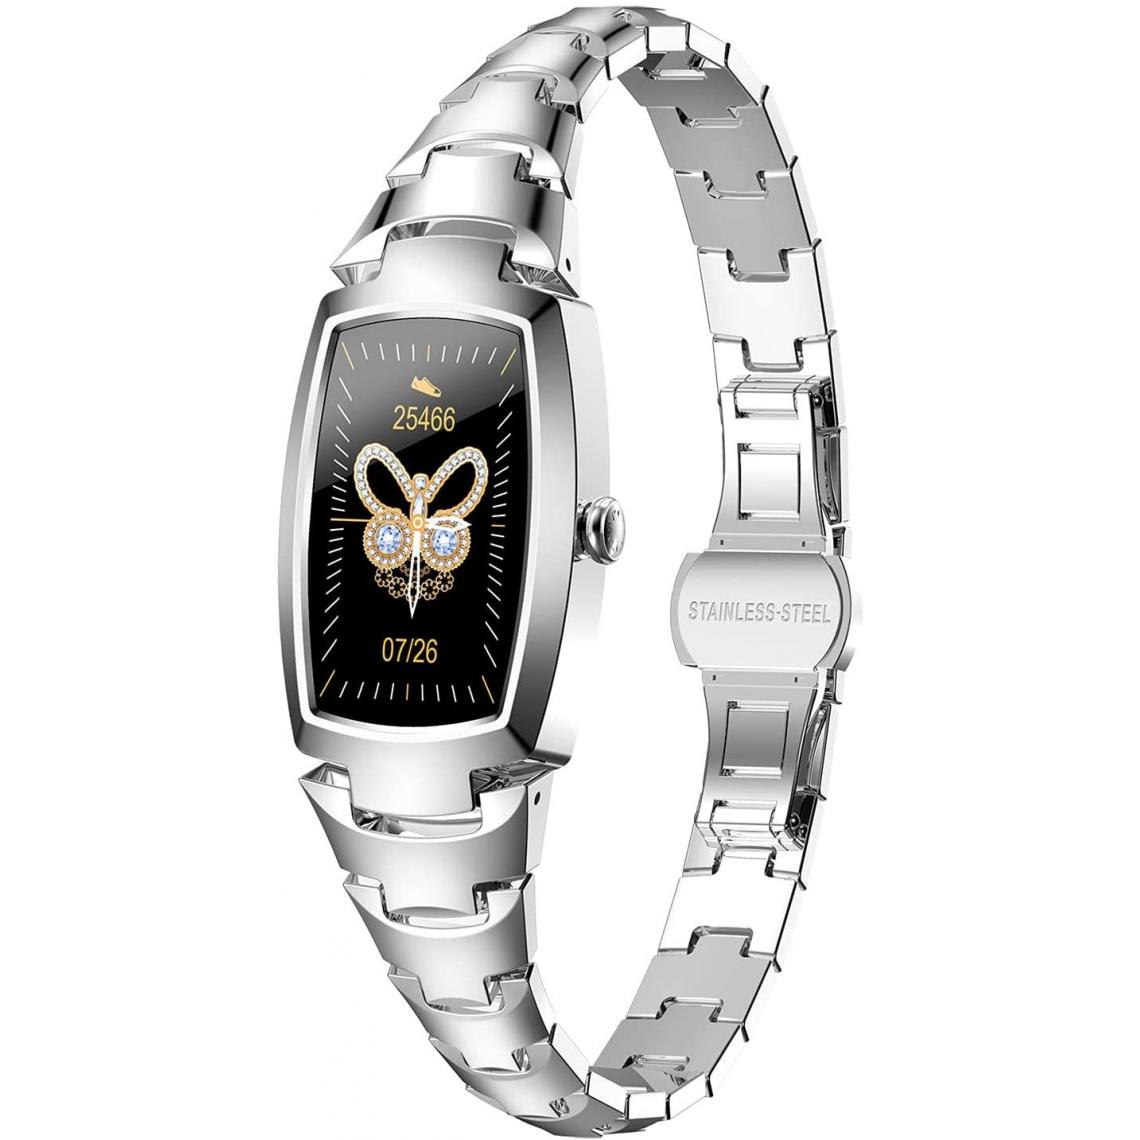 Chronotech Montres - Chronus Connected Watch Women with Female Function, Waterproof Sport Smartwatch IP67(silver) - Montre connectée